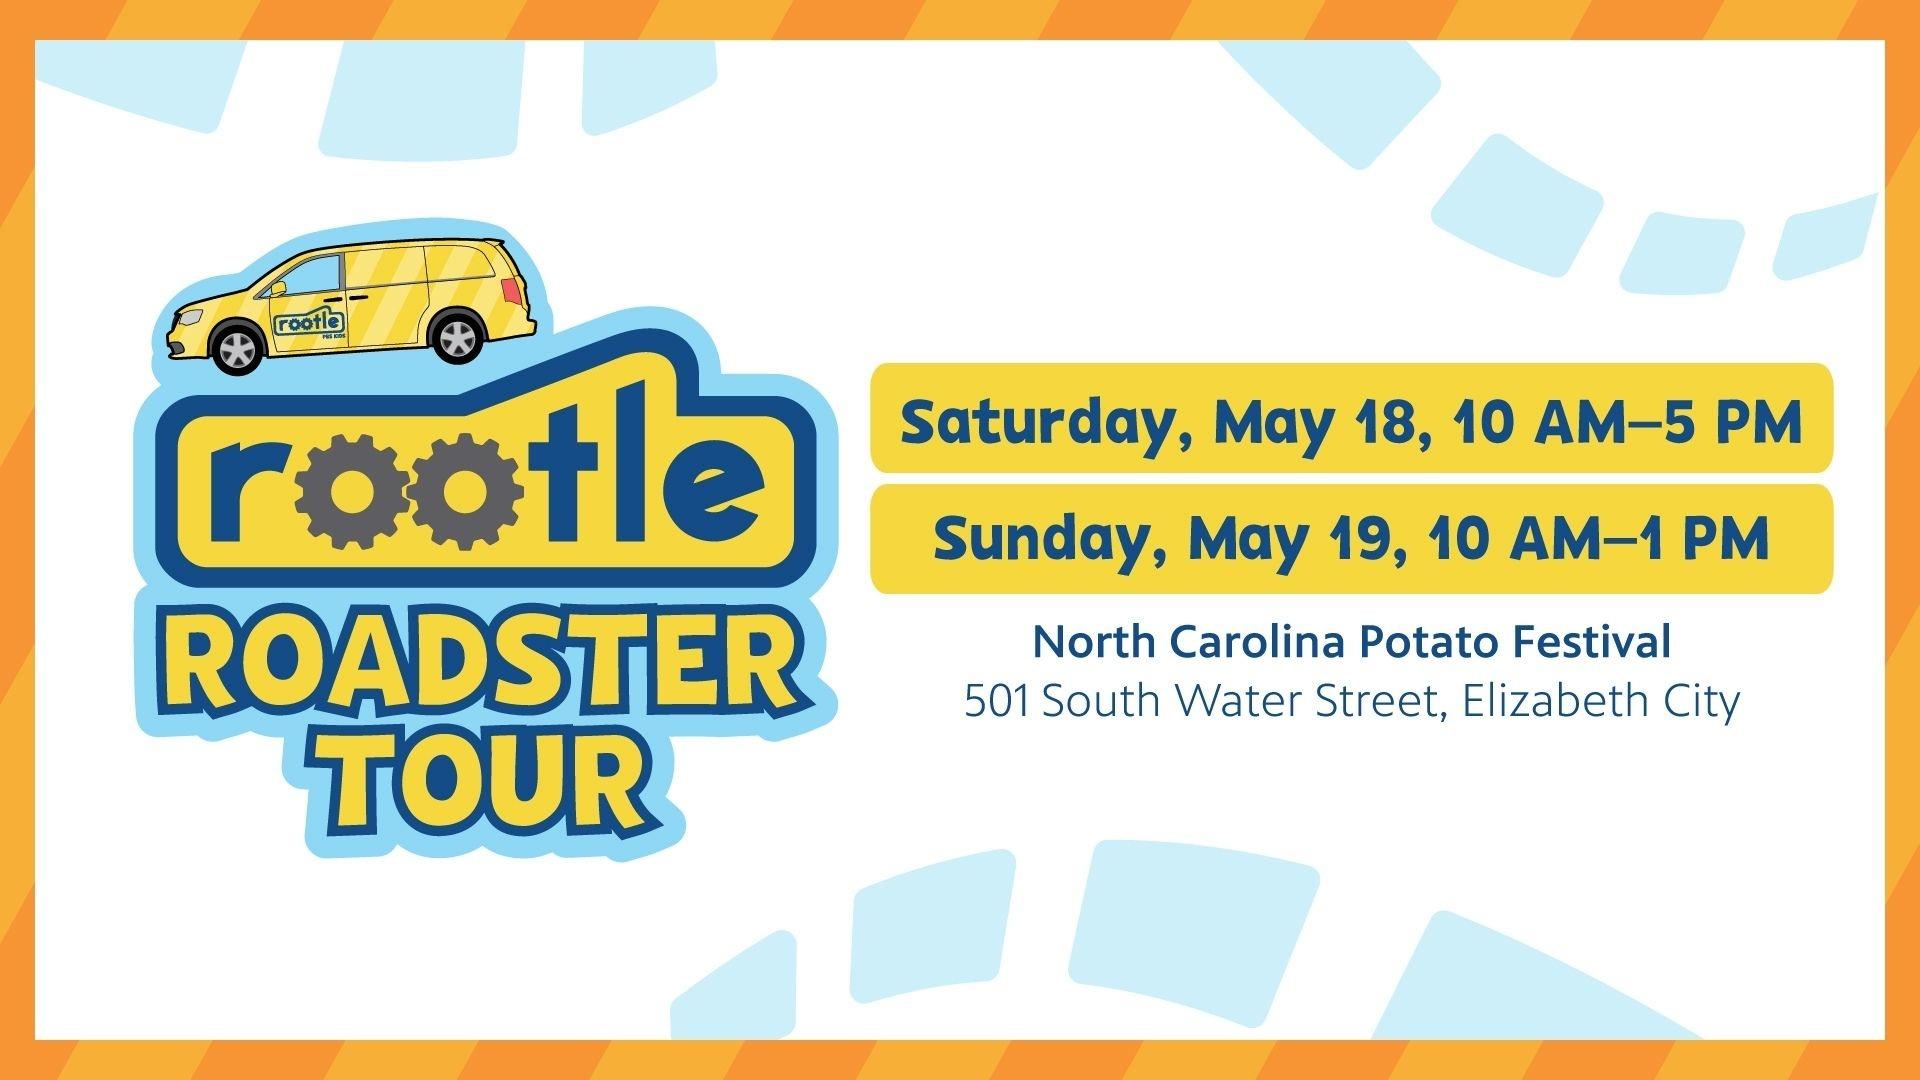 Join the Rootle Roadster Tour at the North Carolina Potato Festival (501 South Water Street, Elizabeth City, NC) on Saturday, May 18, 10 AM-5 PM and Sunday, May 19 10 AM-1 PM.